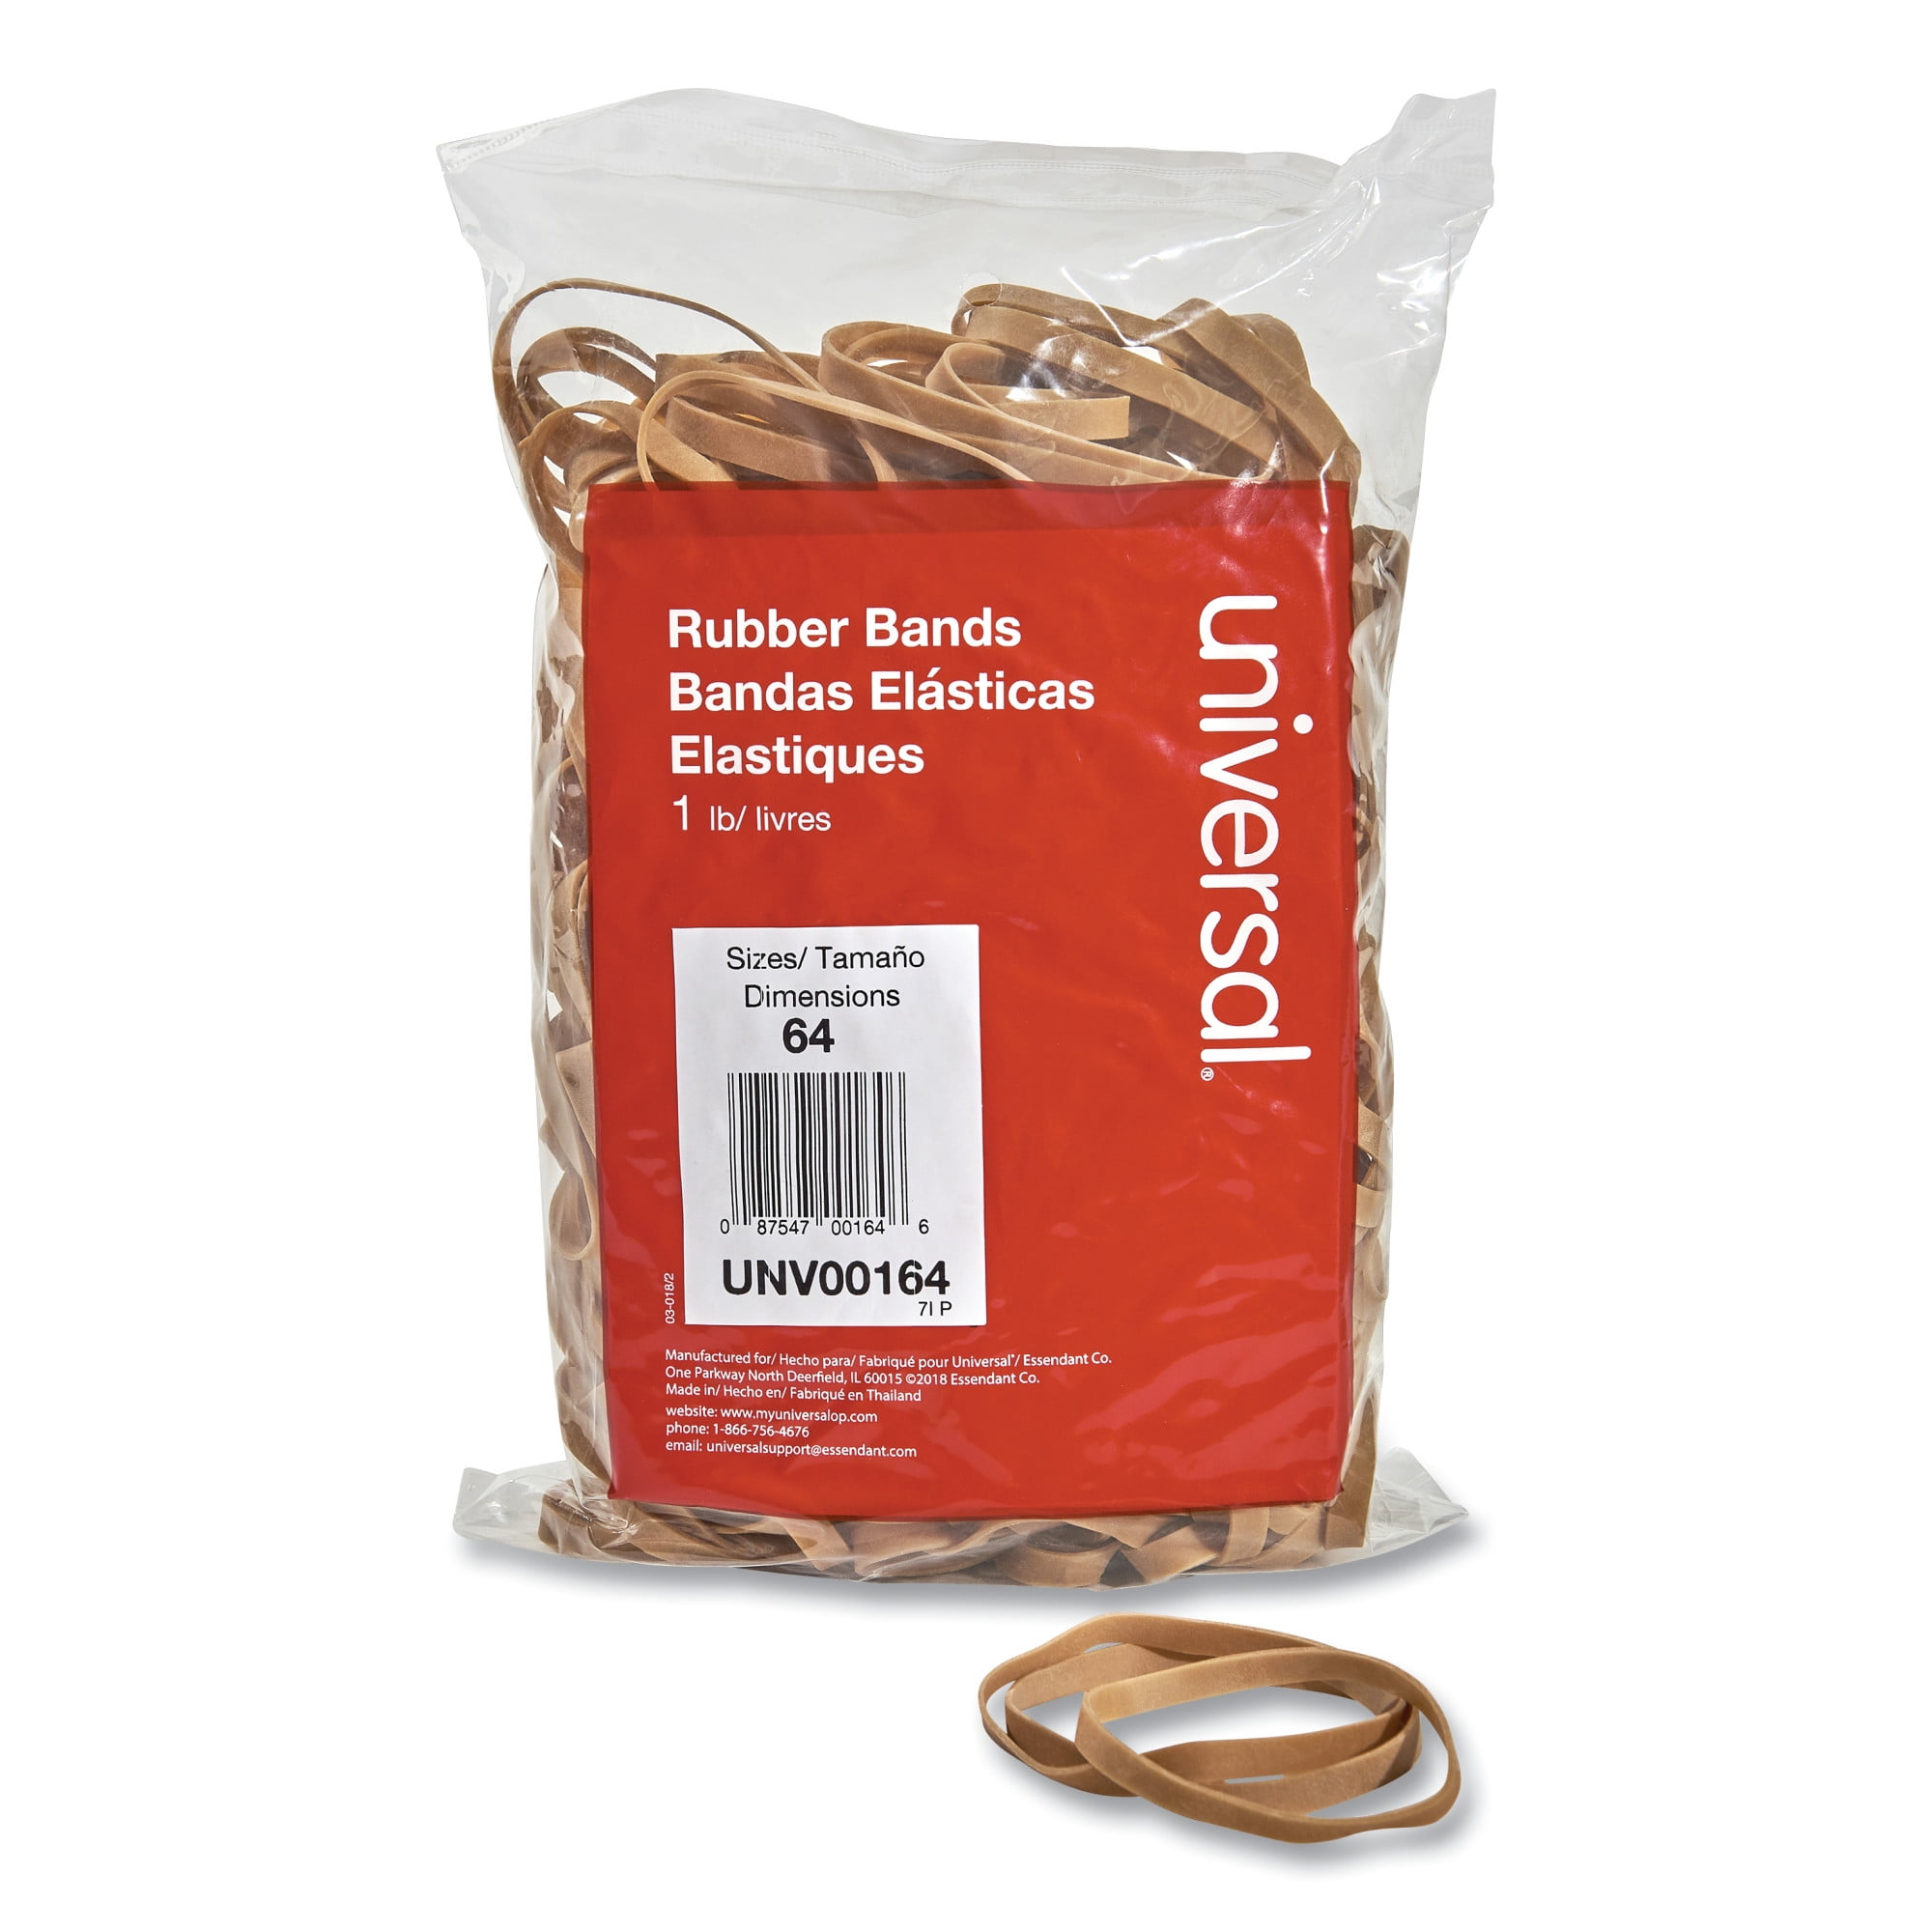 3-1.2 x 1/4 Universal Rubber Bands 320 Bands/1lb Pack Size 64 164 1